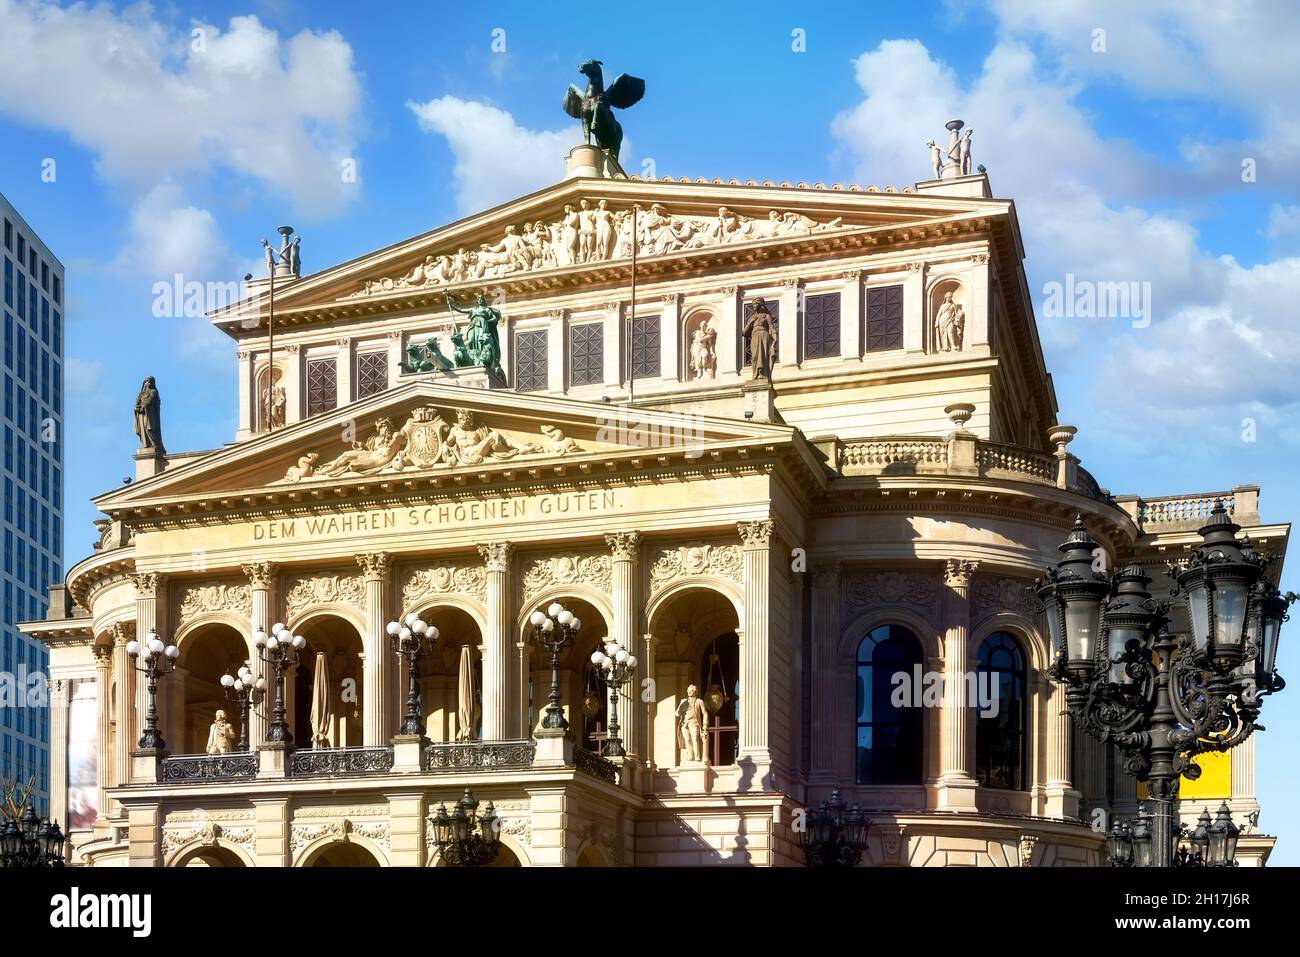 View of the Alte Oper - old opera house, a landmark concert hall in Frankfurt am Main, Germany. Stock Photo